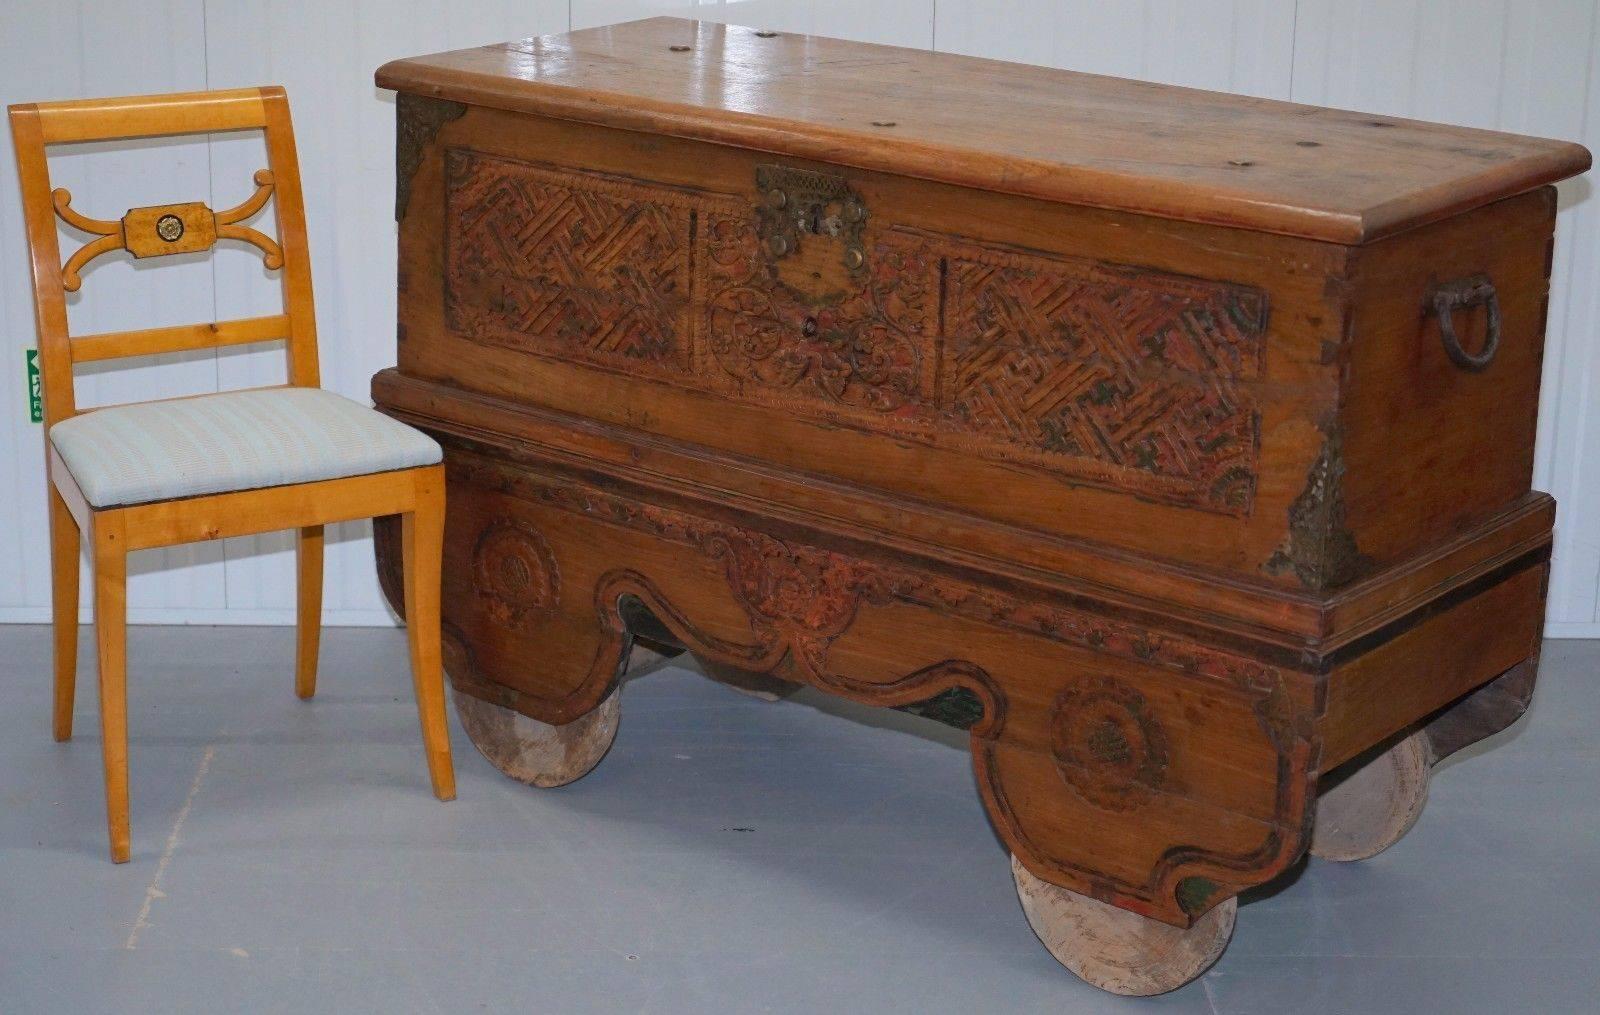 We are delighted to offer for auction this stunning antique Indian traveling trunk or chest on wooden wheels, handmade and painted

A very good looking and functional piece in period antique condition throughout. We have deep cleaned hand